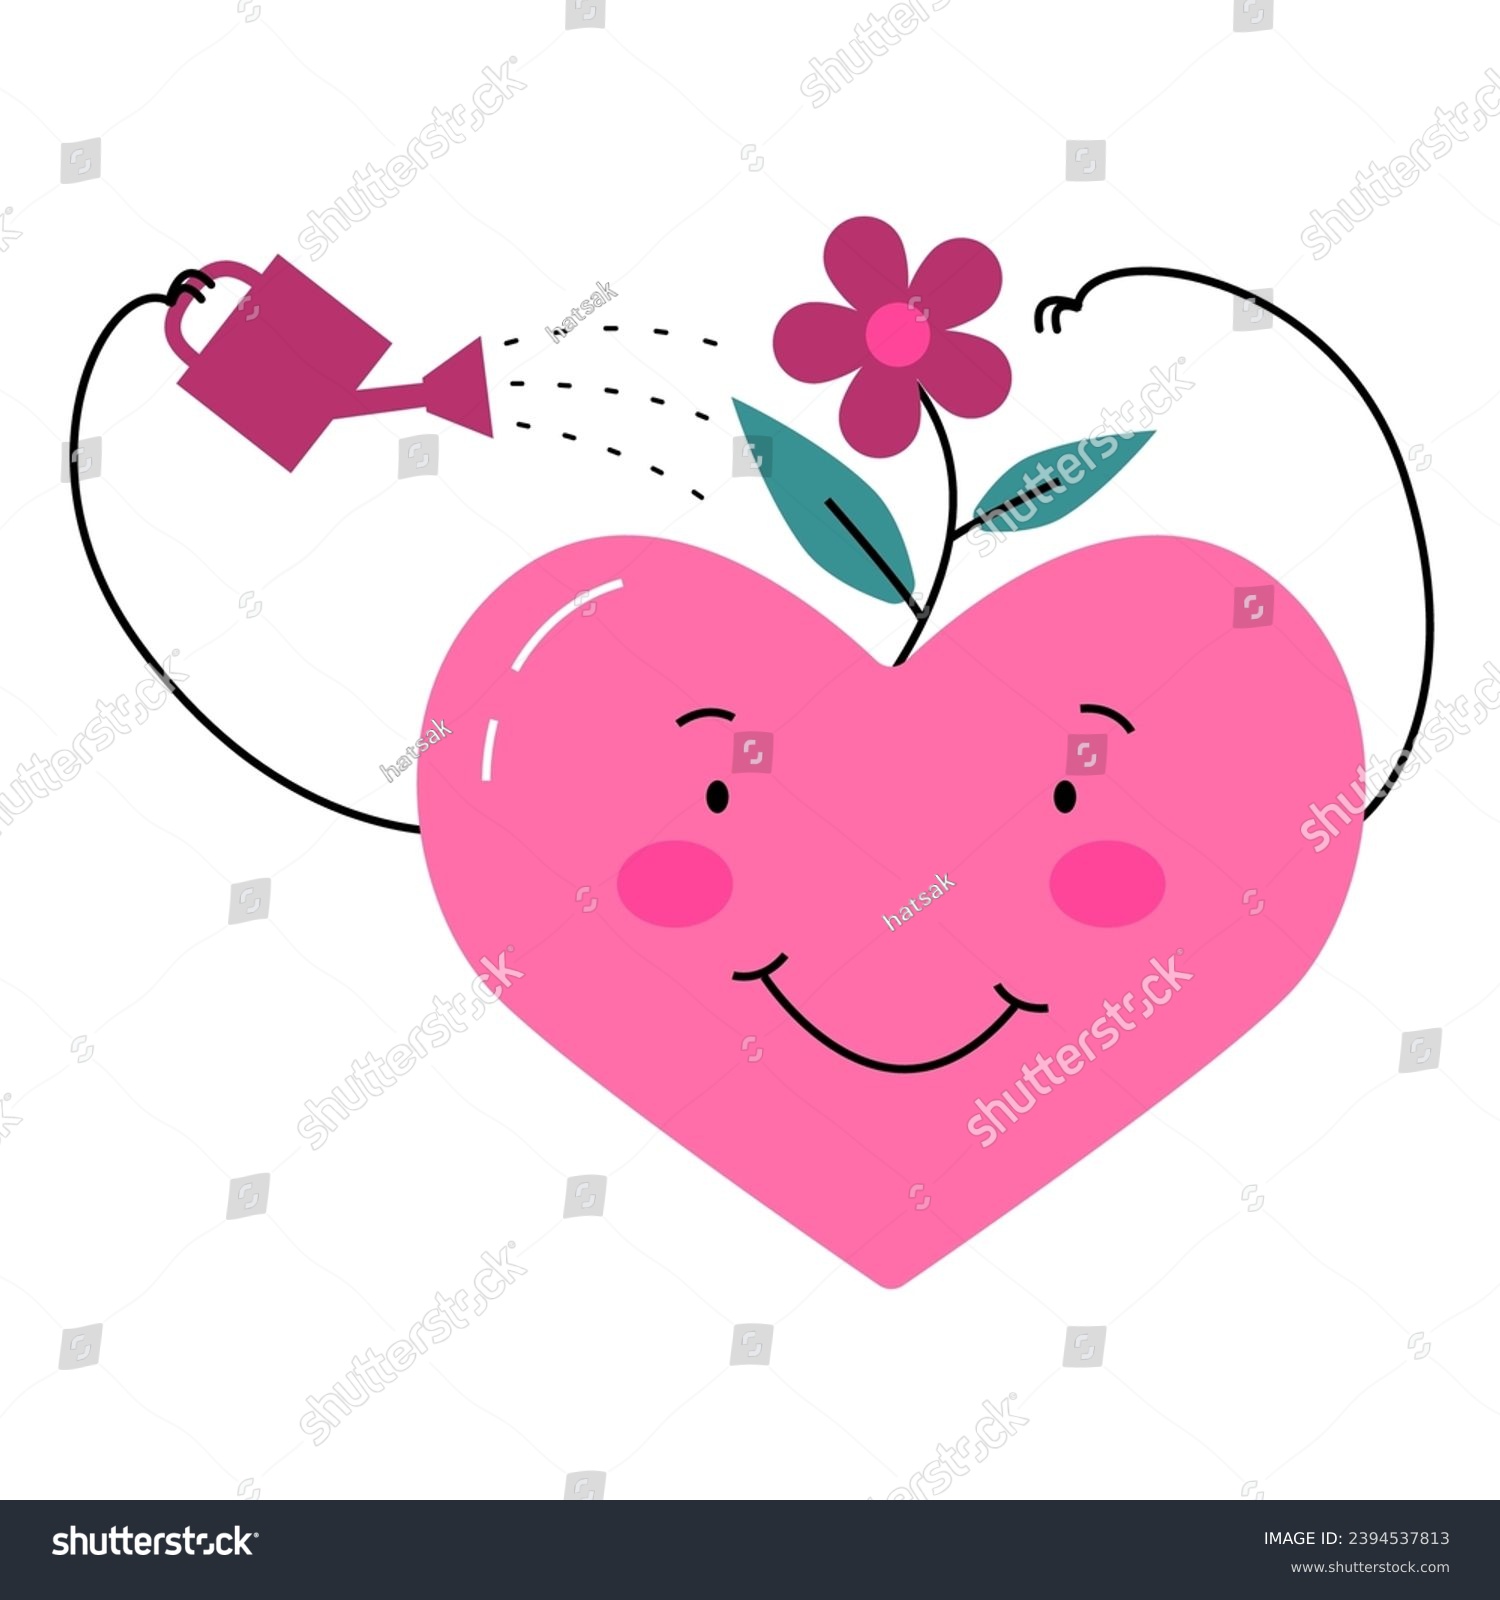 SVG of Heart with flower. Watering a flower from a watering can. Spotlight on self-care and the benefits effective self-care can bring to both individuals and healthcare systems. Mental health concept svg